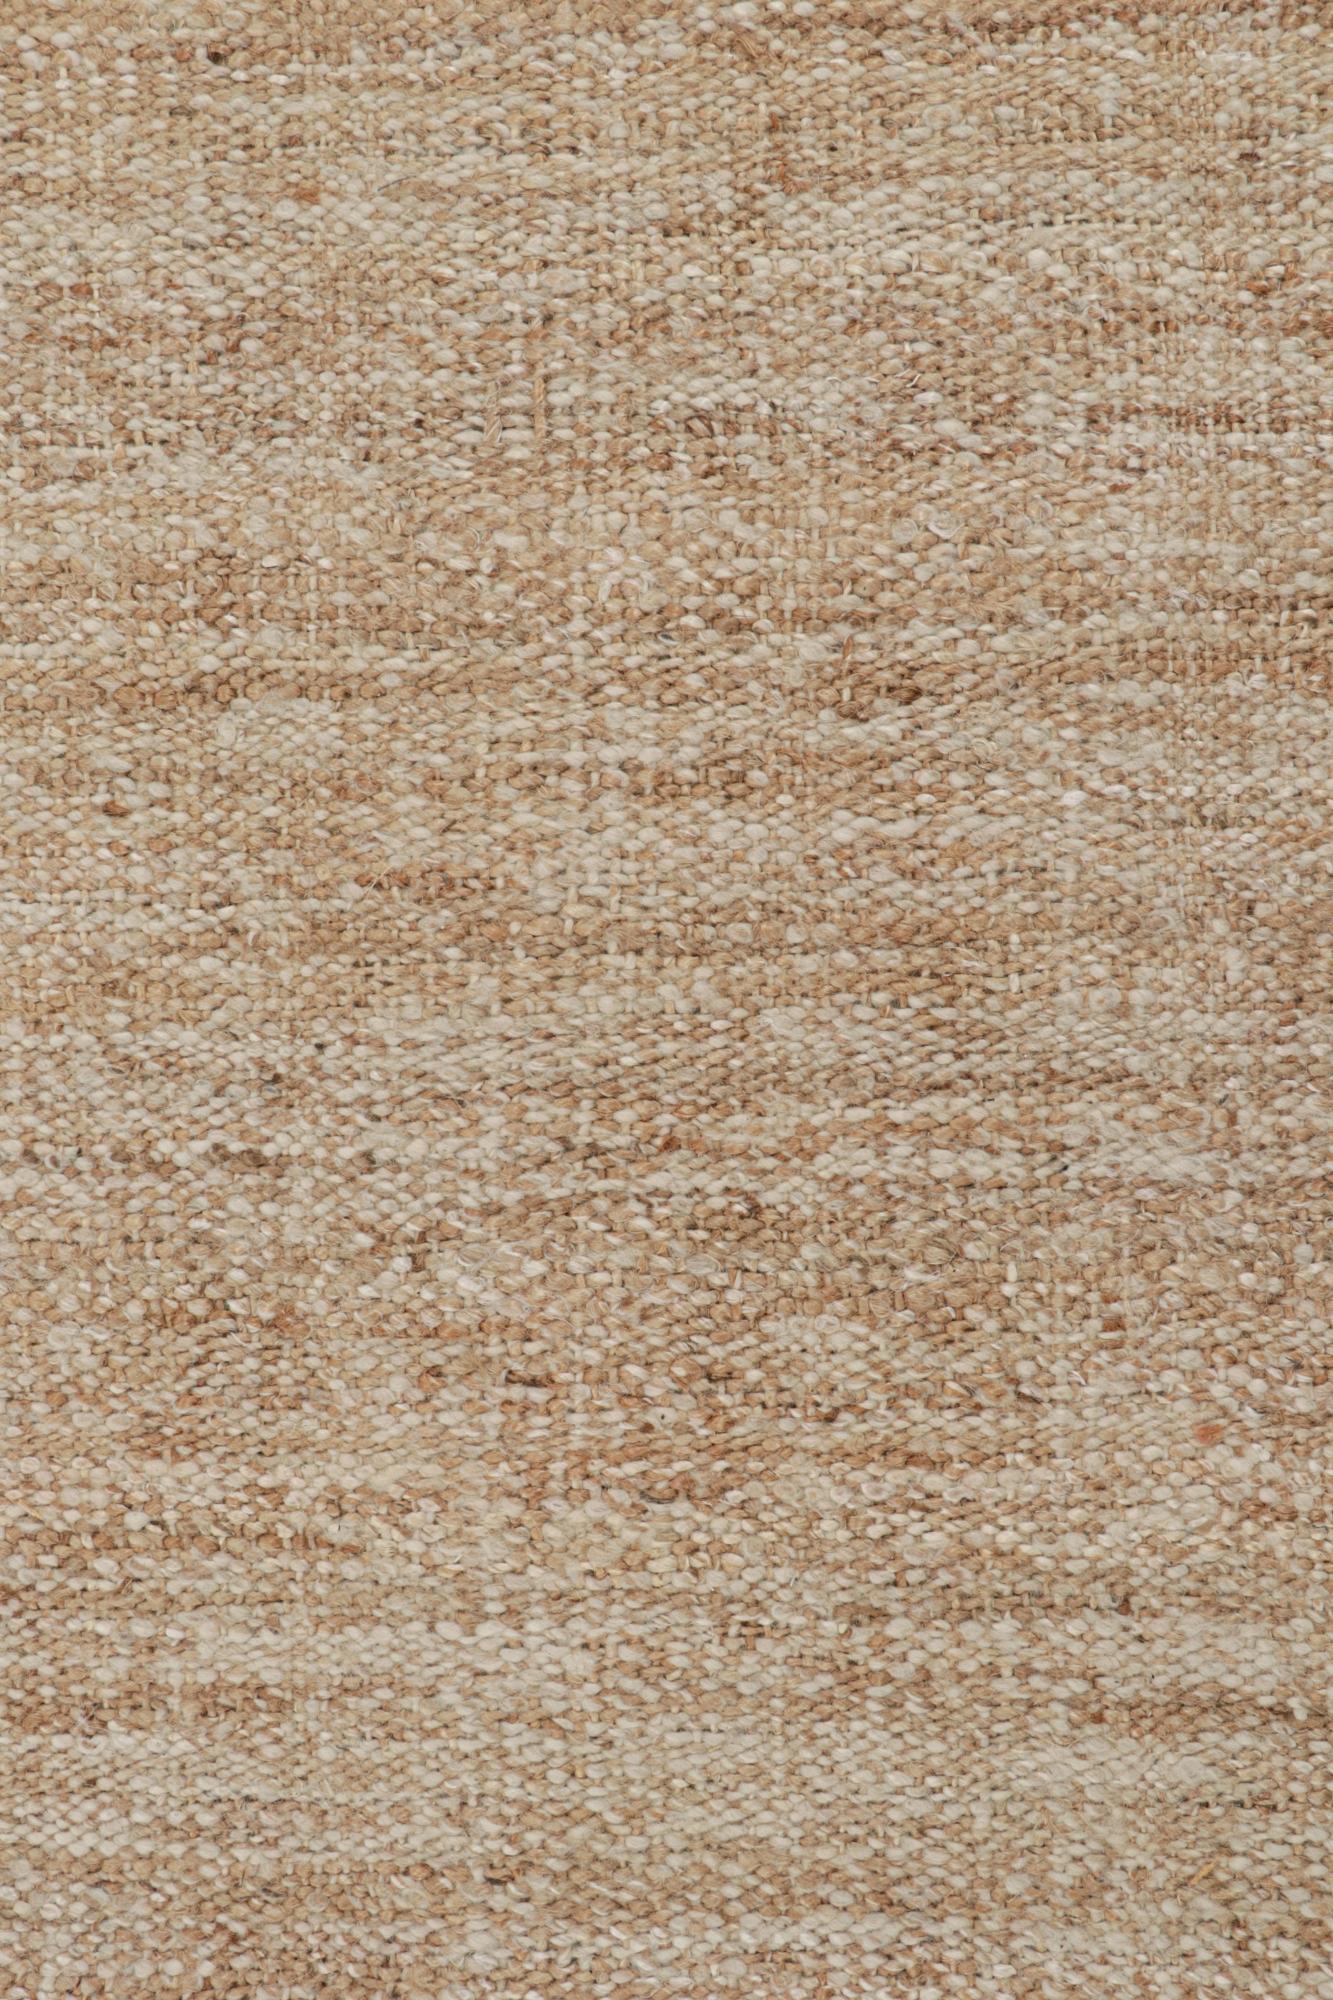 This 12x15 flatweave in contemporary design belongs to Rug & Kilim’s brand new collection - all handwoven in jute.

On the Design:

The kilim rug enjoys a tasteful boucle-like texture and sense of movement for a more modern take on plain rugs. A